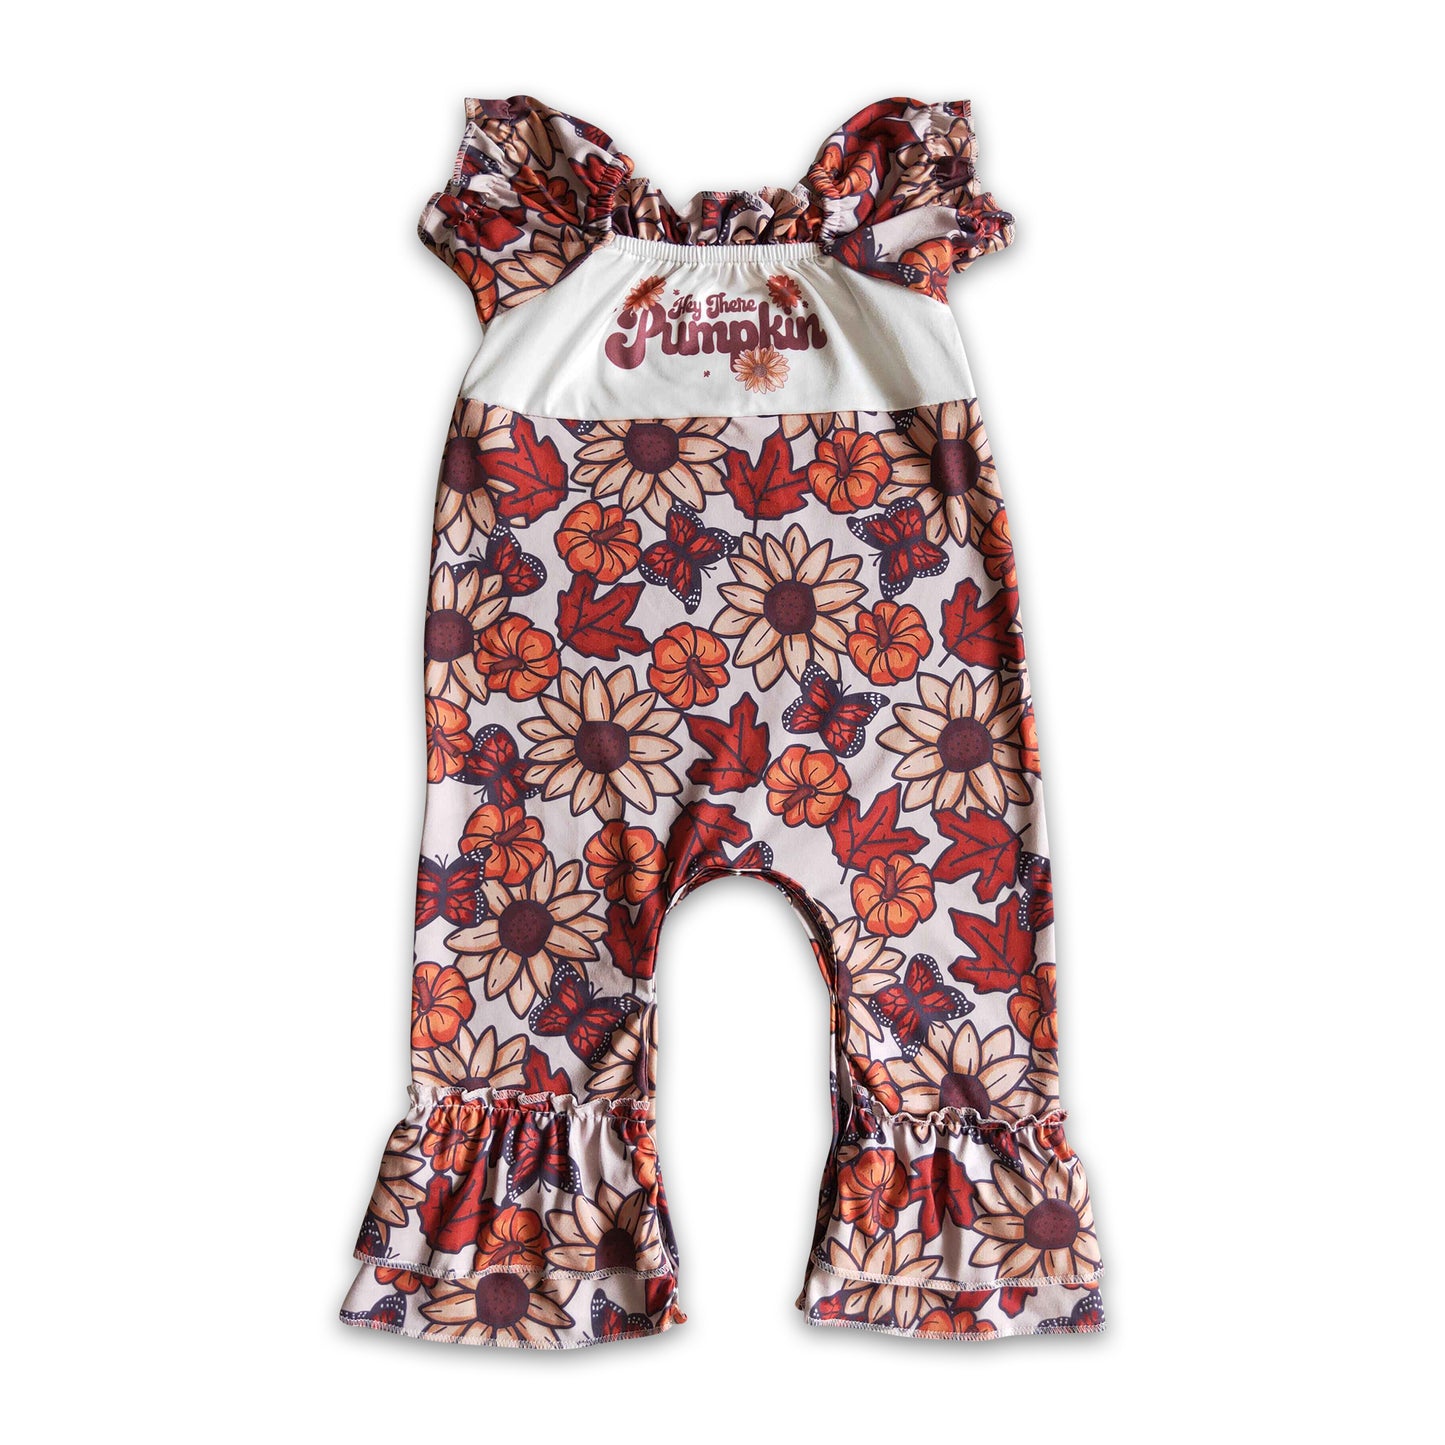 Hey there pumpkin leaves floral baby girls fall romper